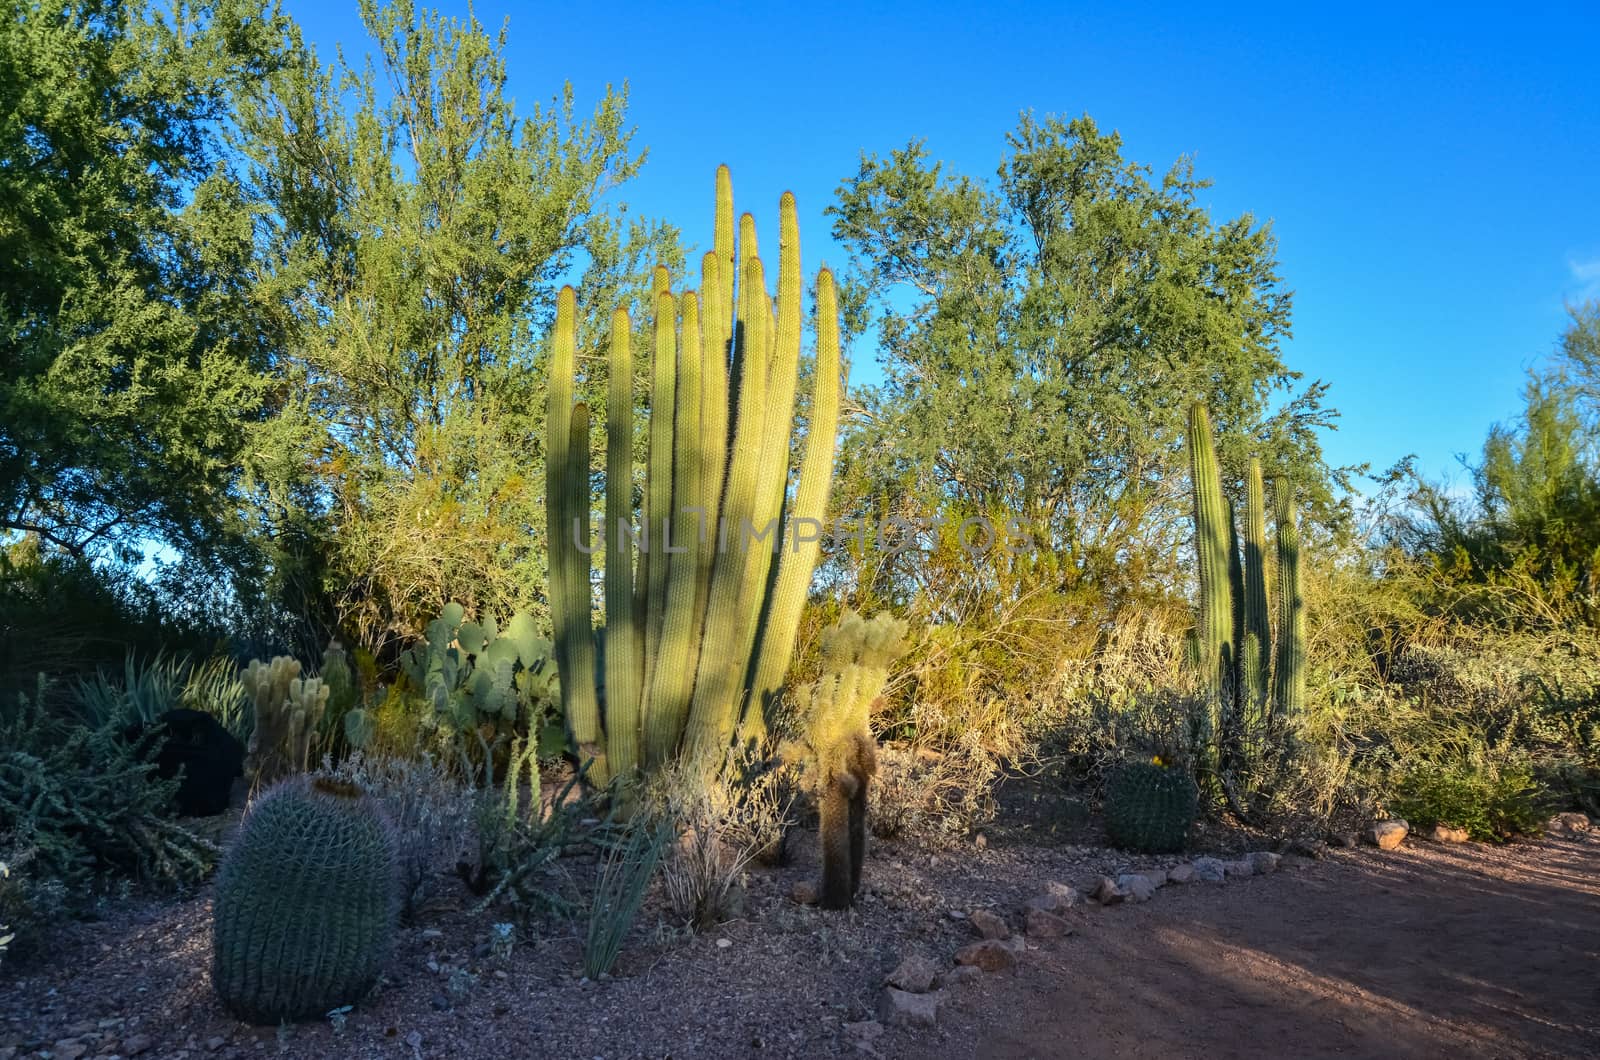 A group of succulent plants Agave and Opuntia cacti in the botanical garden of Phoenix, Arizona, USA